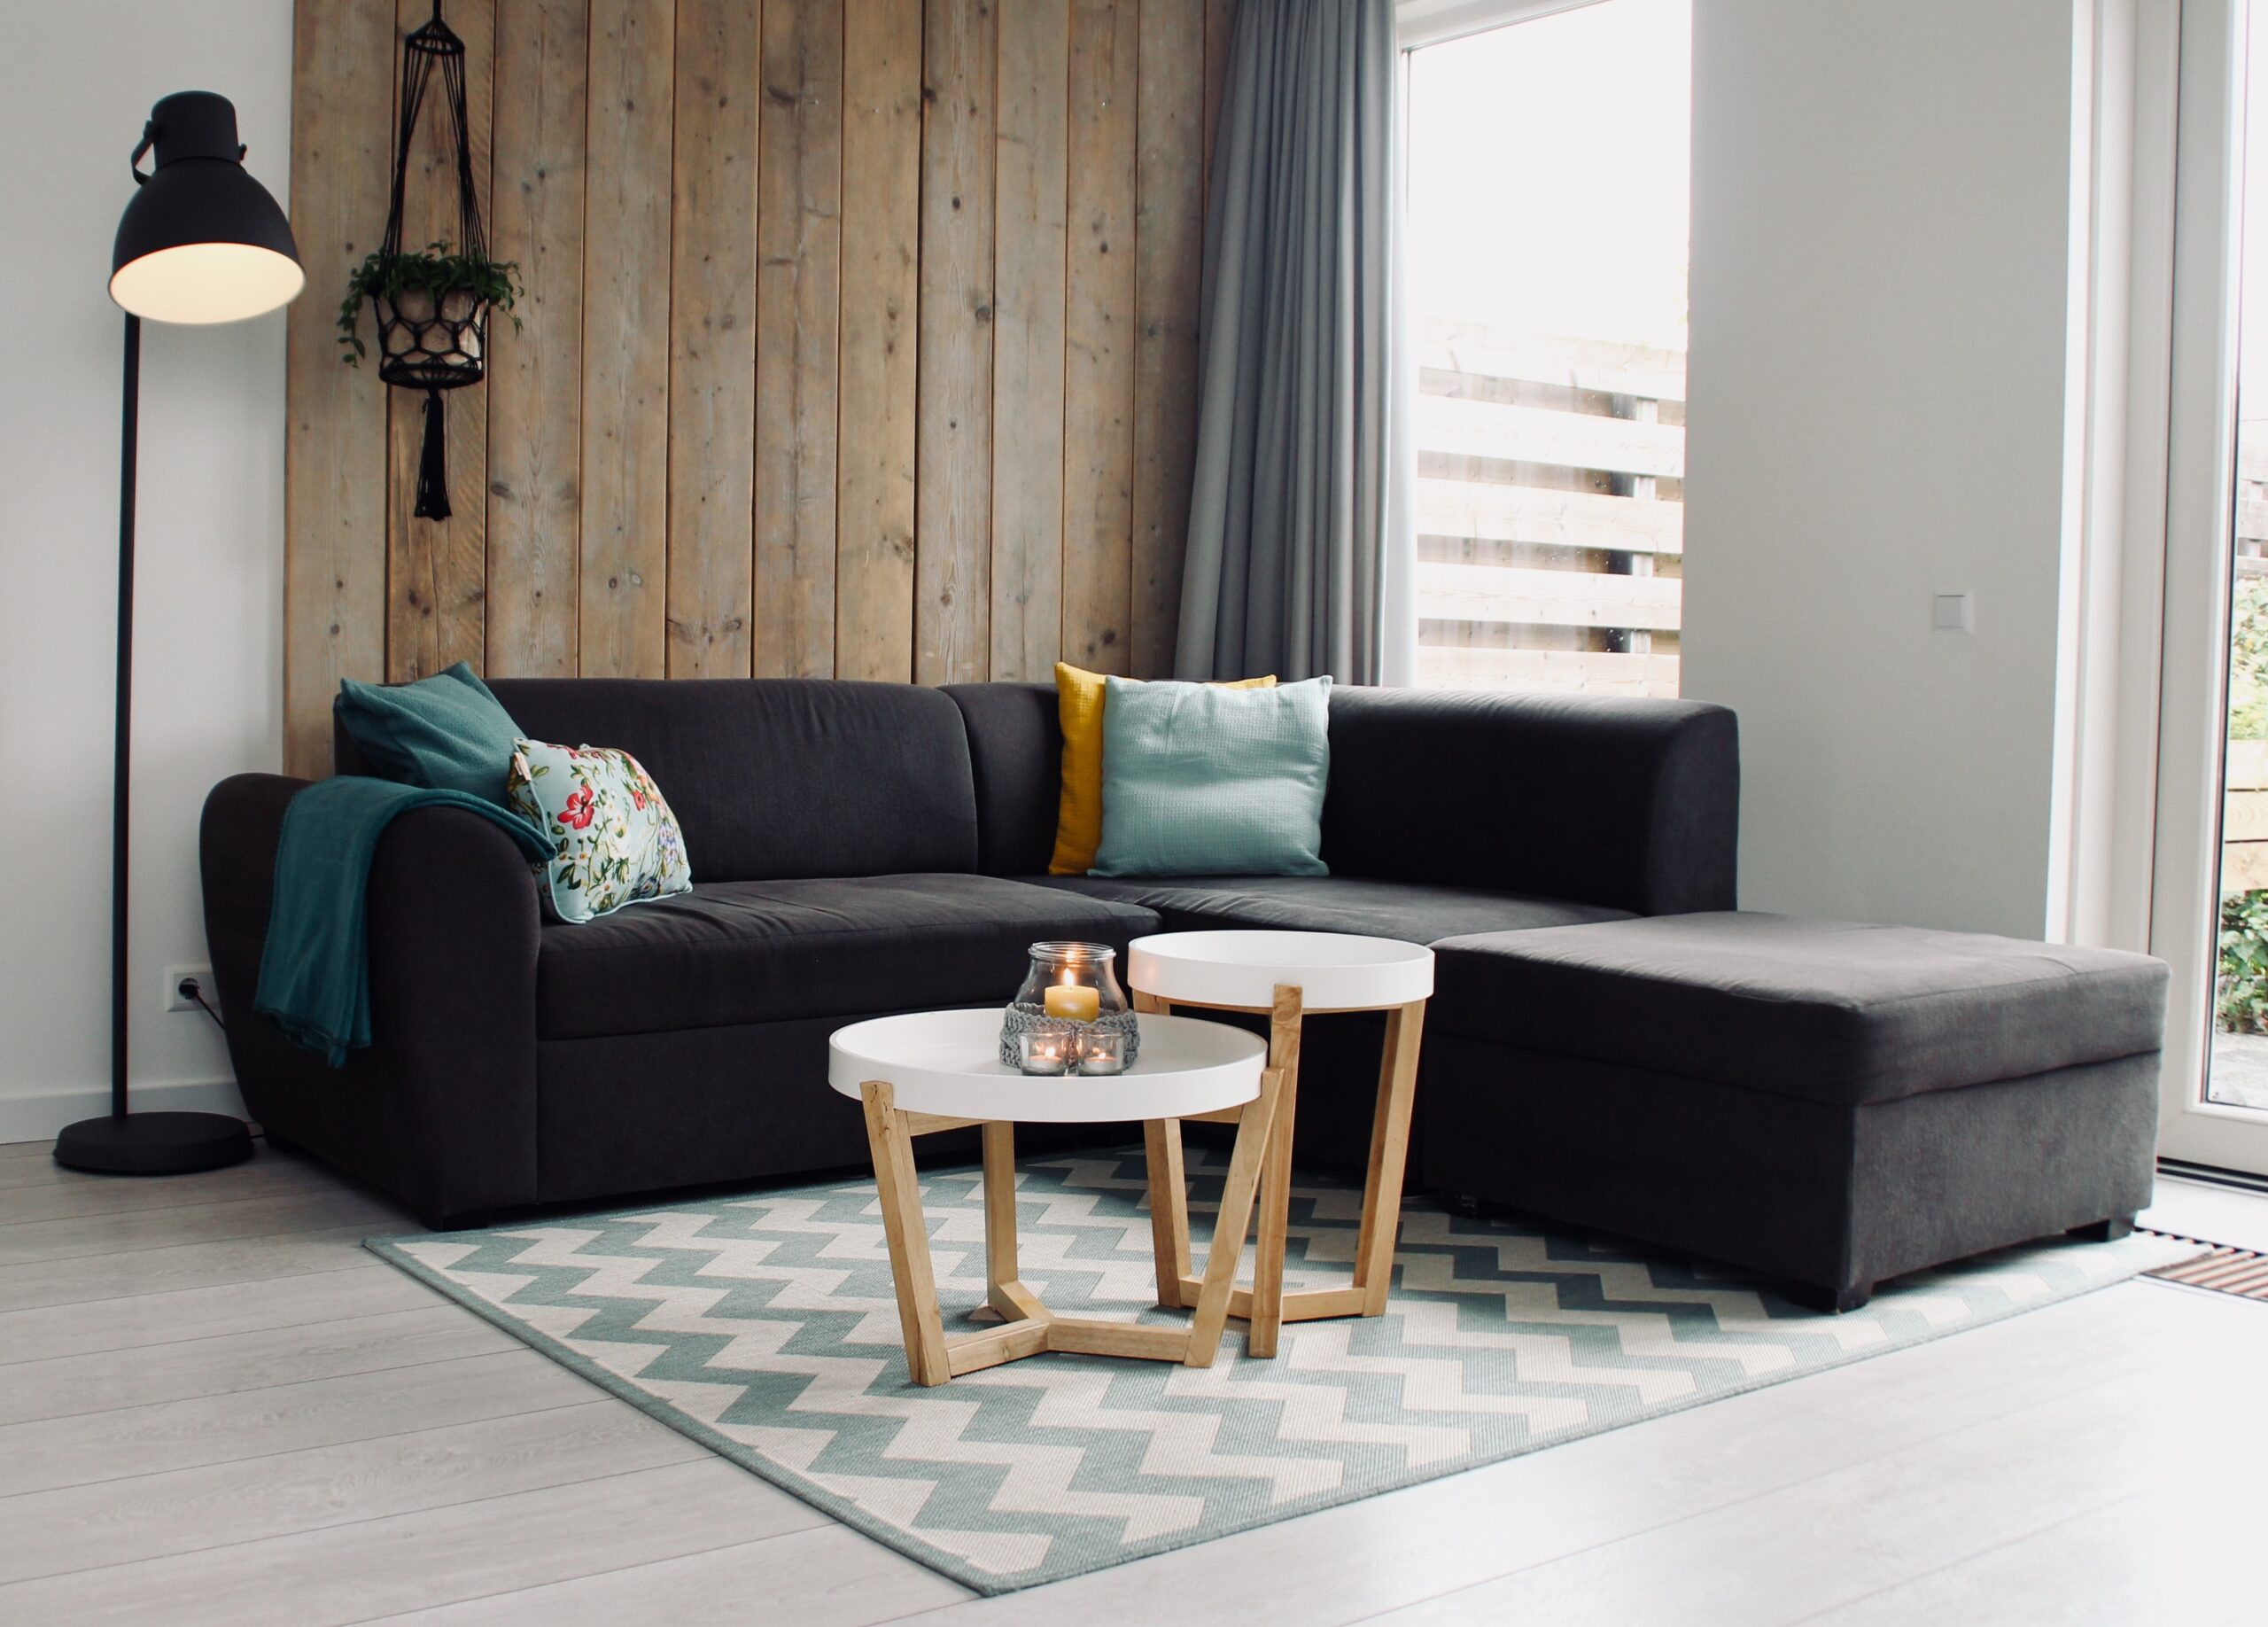 Black sectional couch with teal pillows in a living room with a wooden wall